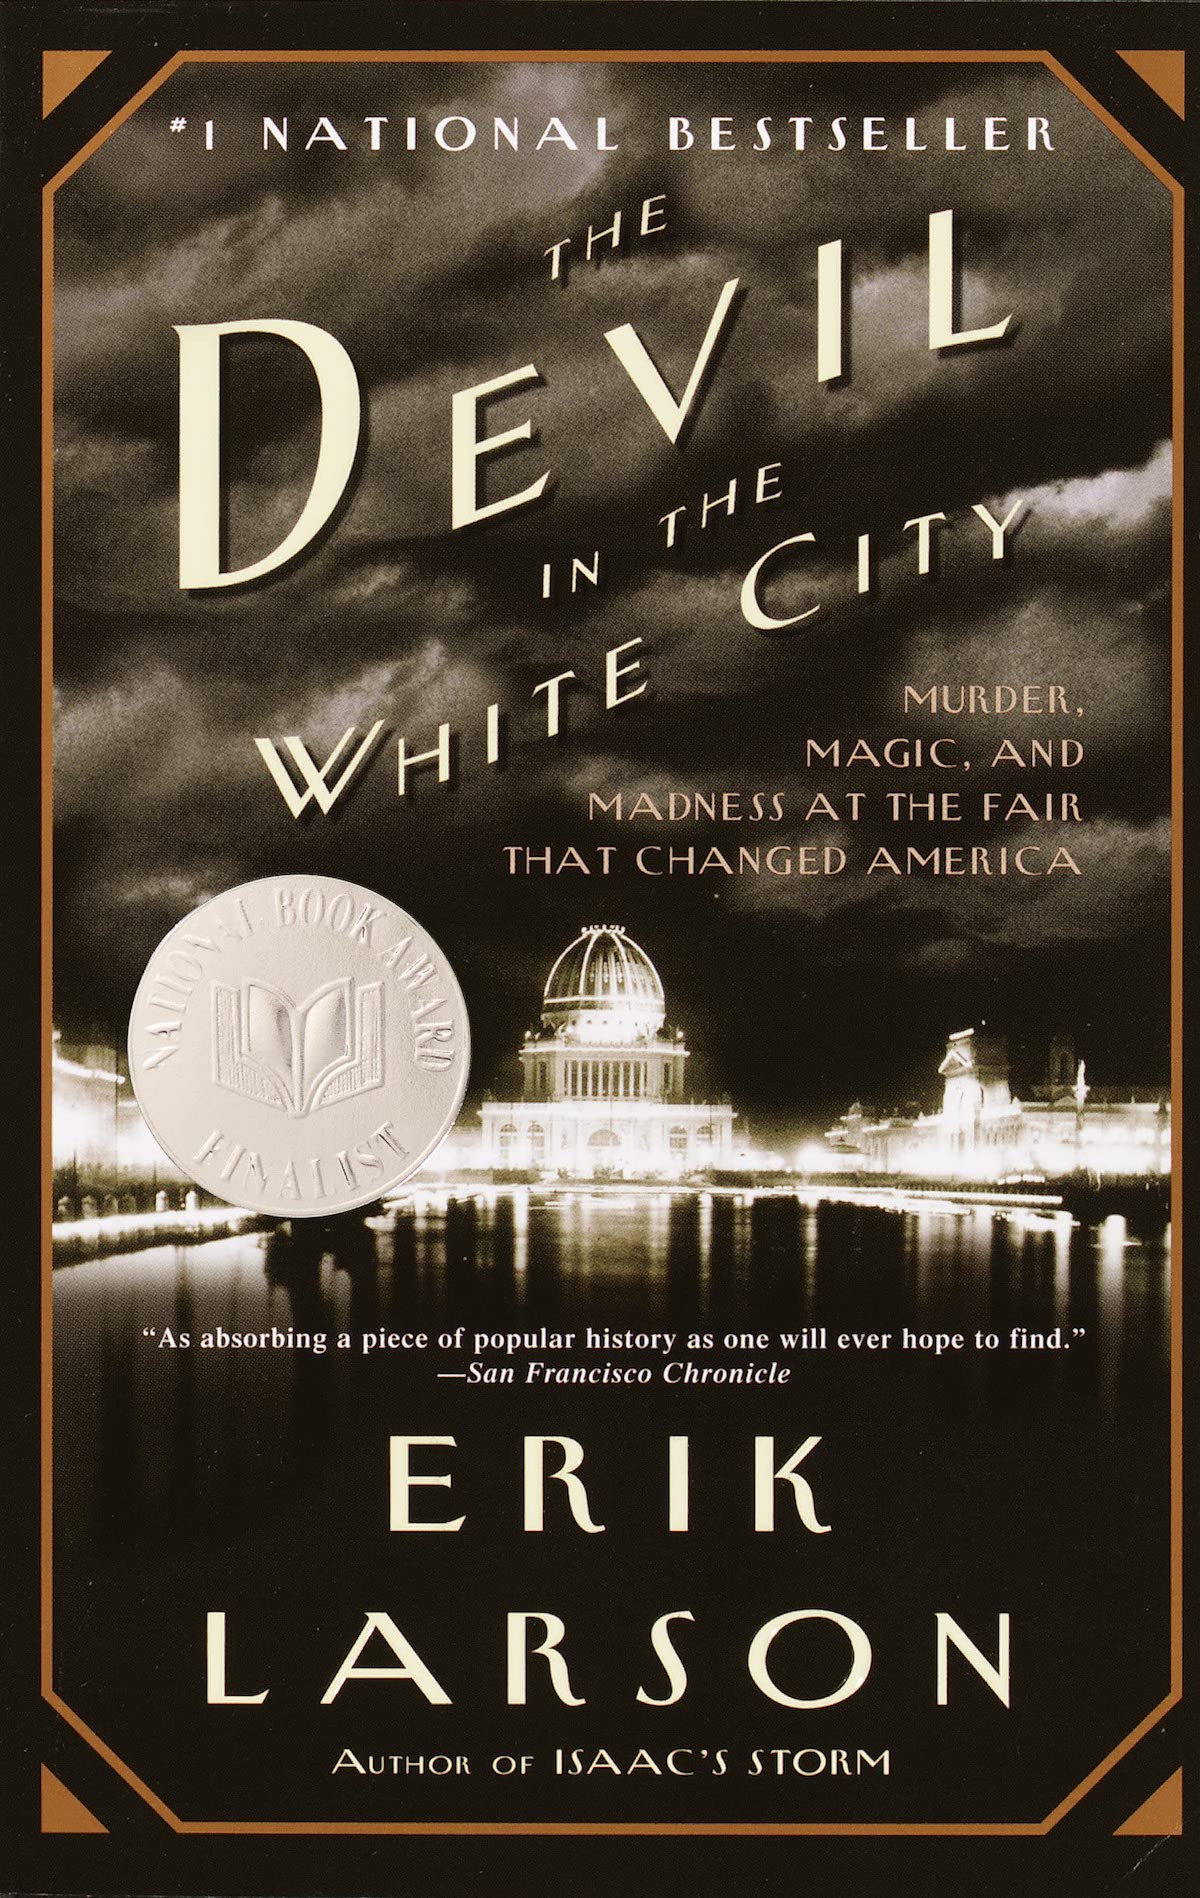 The mostly black and white cover of The Devil in the White City